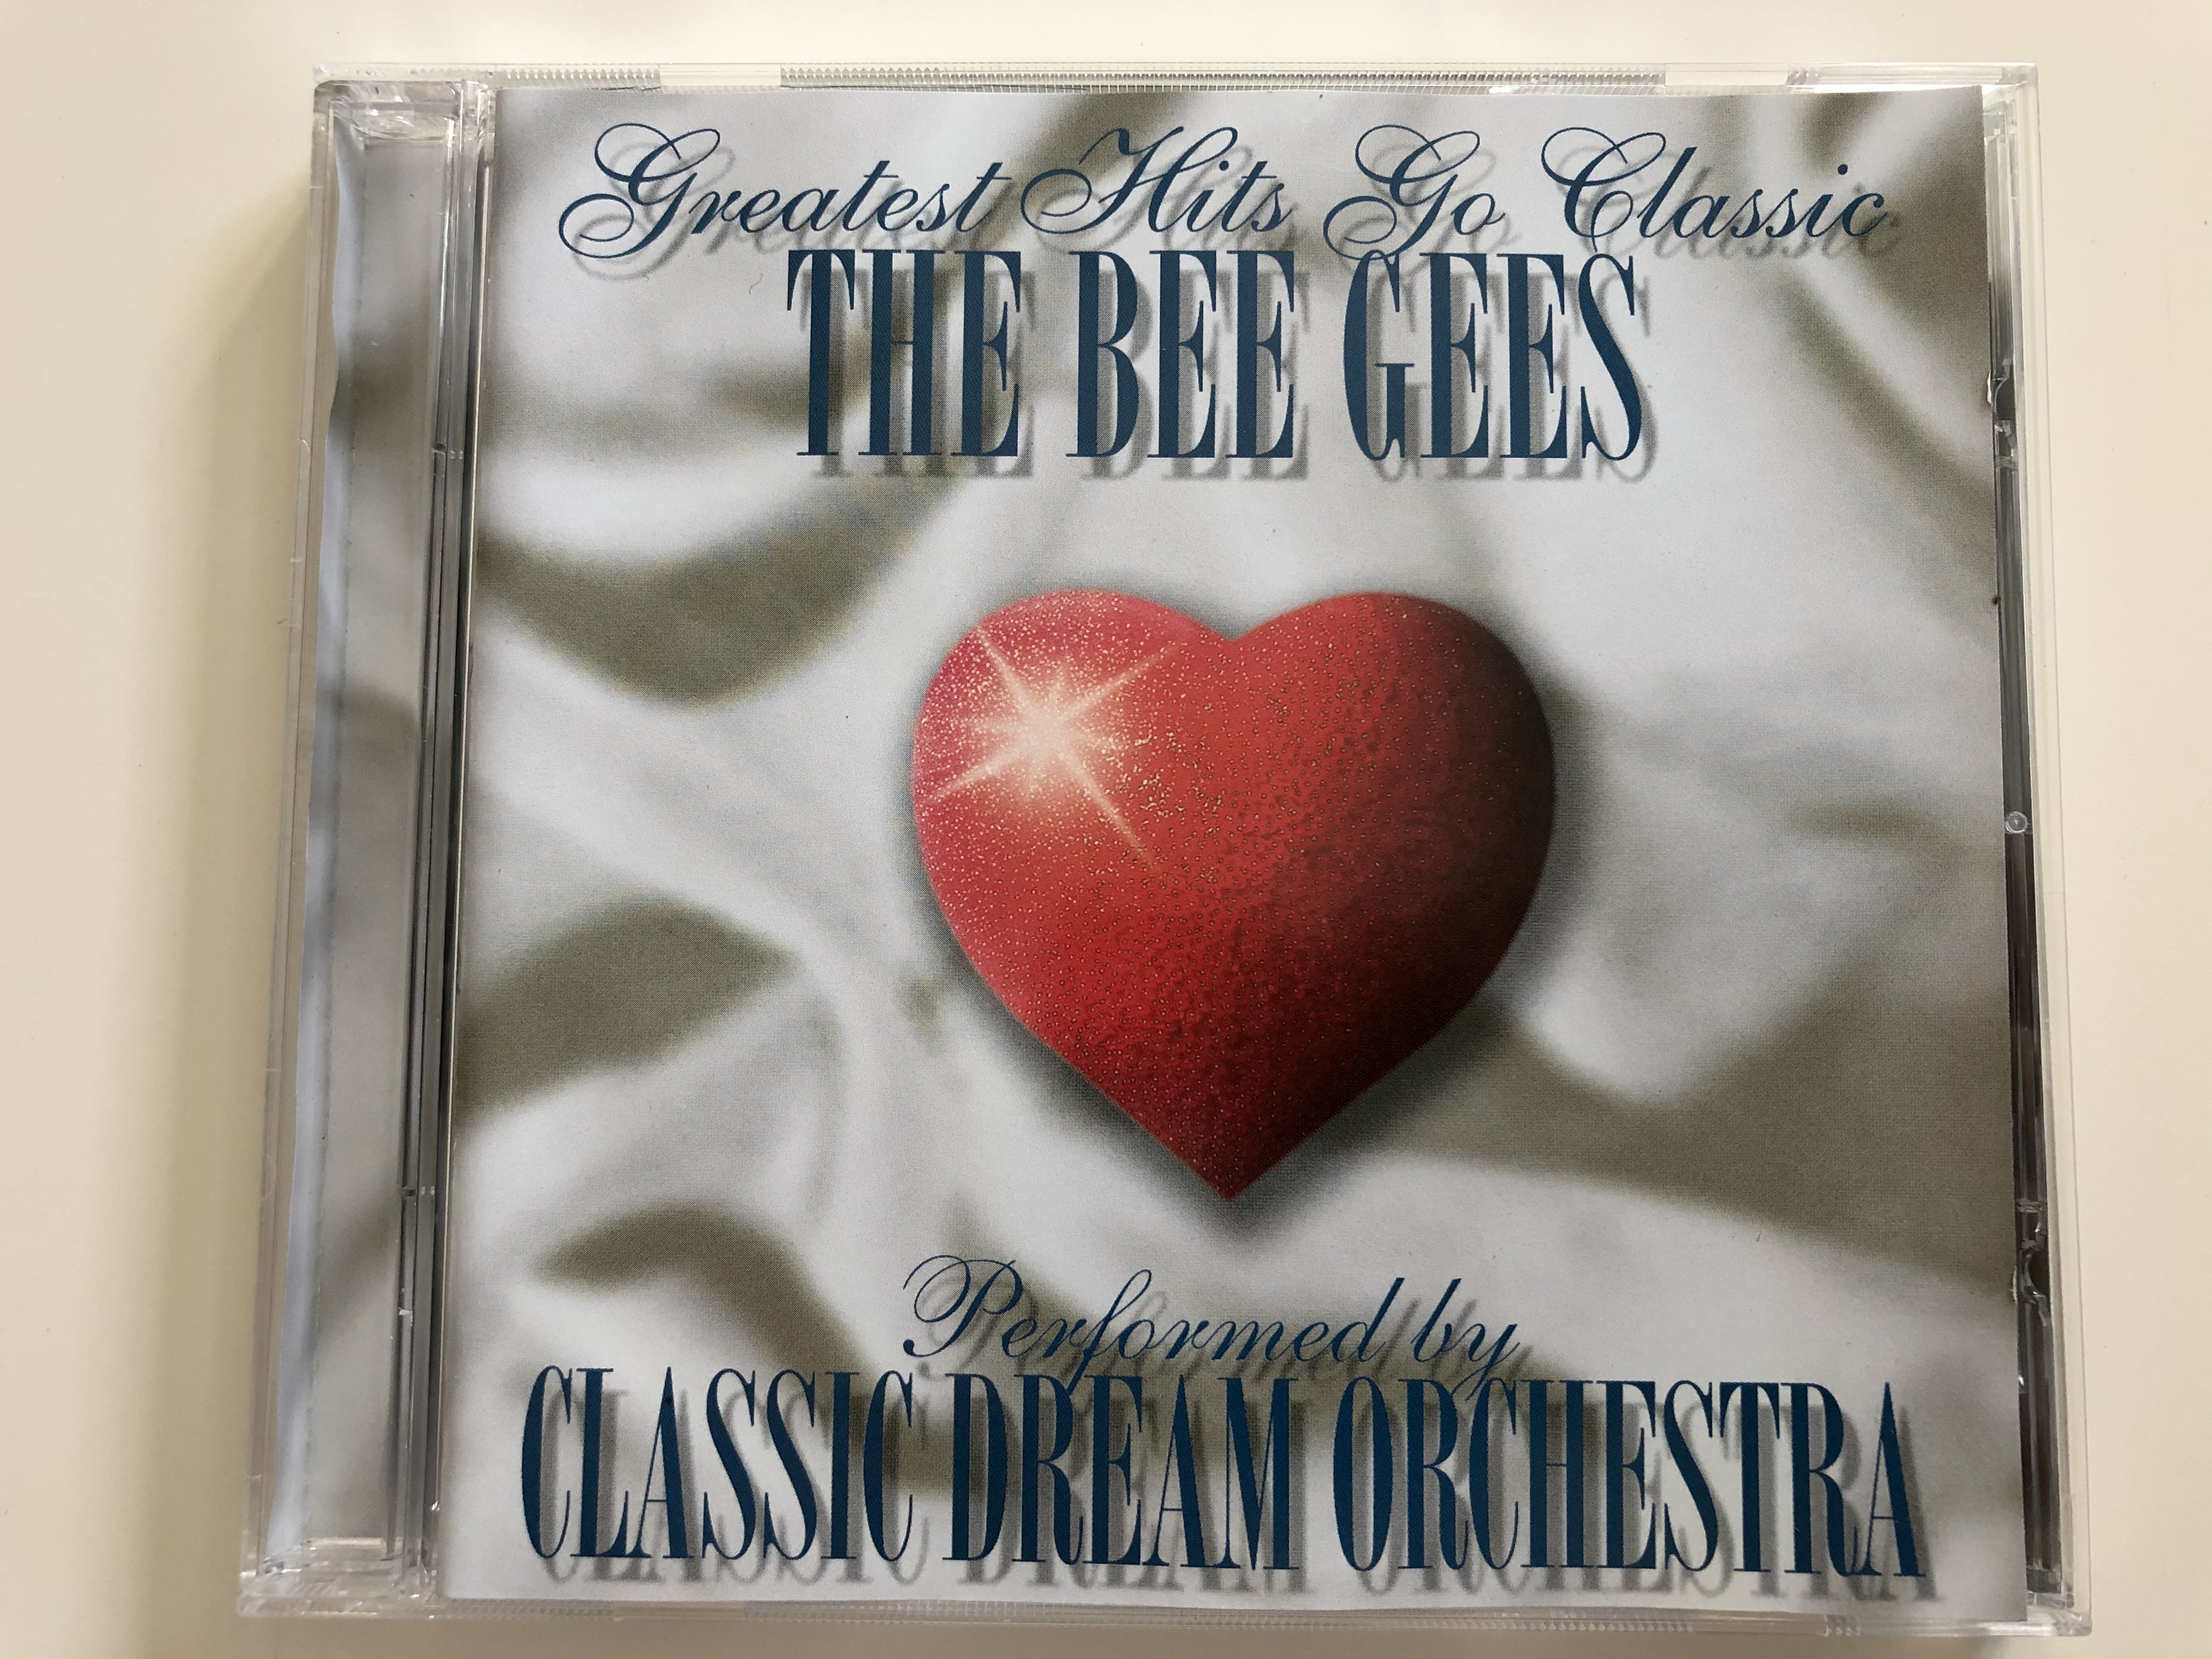 greatest-hits-go-classic-the-bee-gees-performed-by-classic-dream-orchestra-bmg-audio-cd-2001-stereo-74321-89434-2-1-.jpg